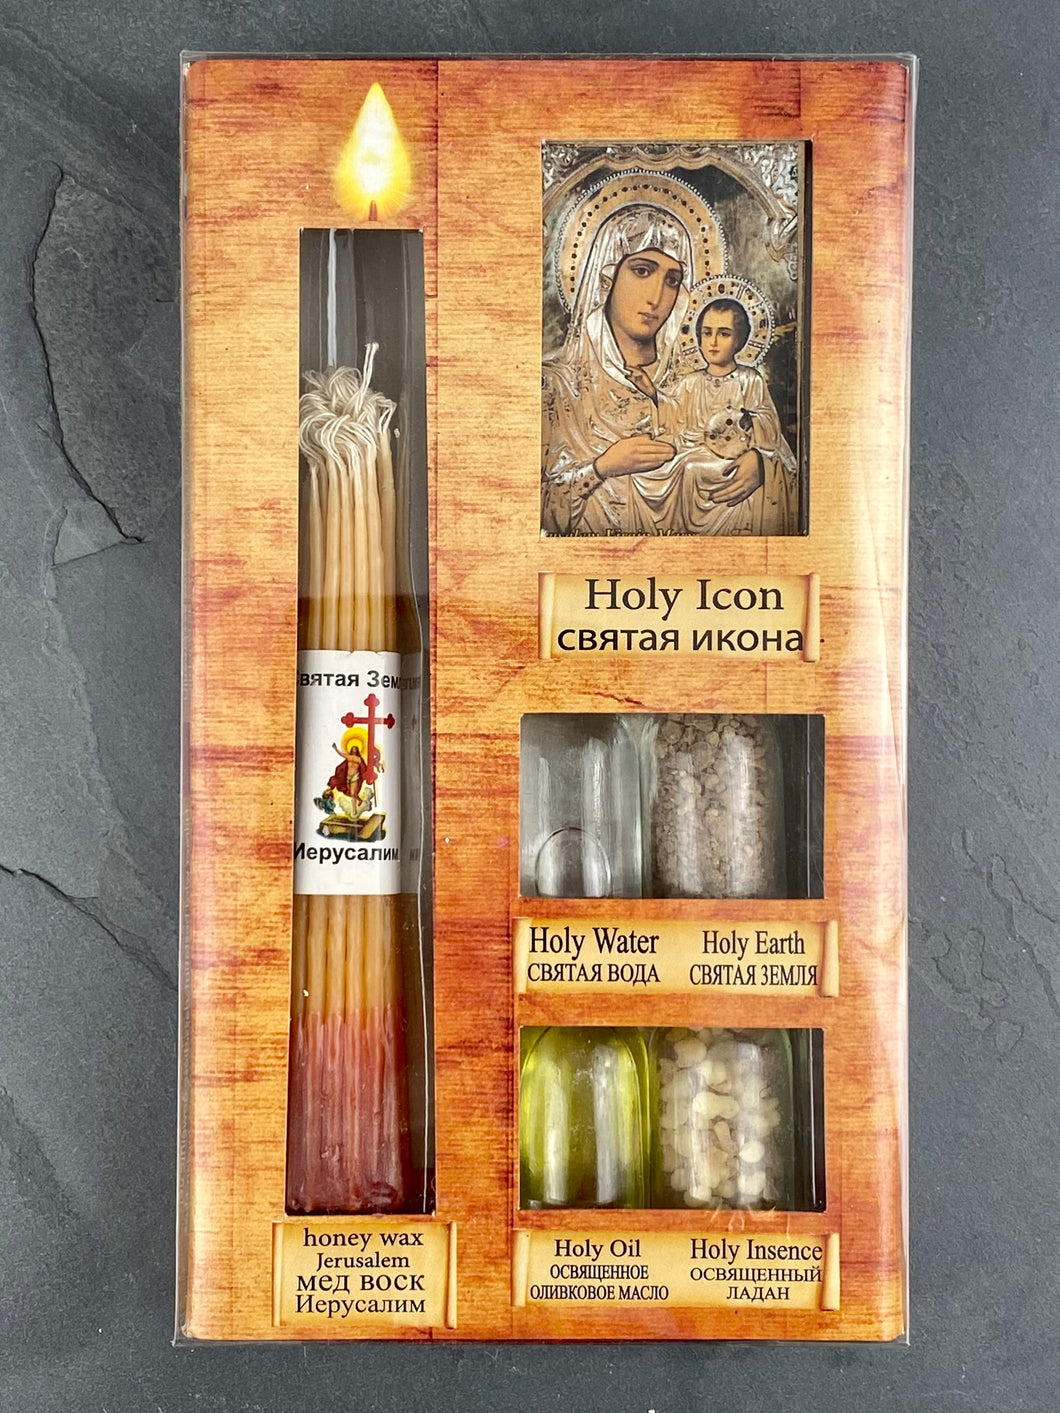 This Holy Box Set from Jerusalem contains Pure Water from the Jordan River, Genuine Earth From Jerusalem, Holy Olive Oil from Bethlehem, Holy Incense, Byzantine Icon and 5” Tapered Holy Candle. HB20224